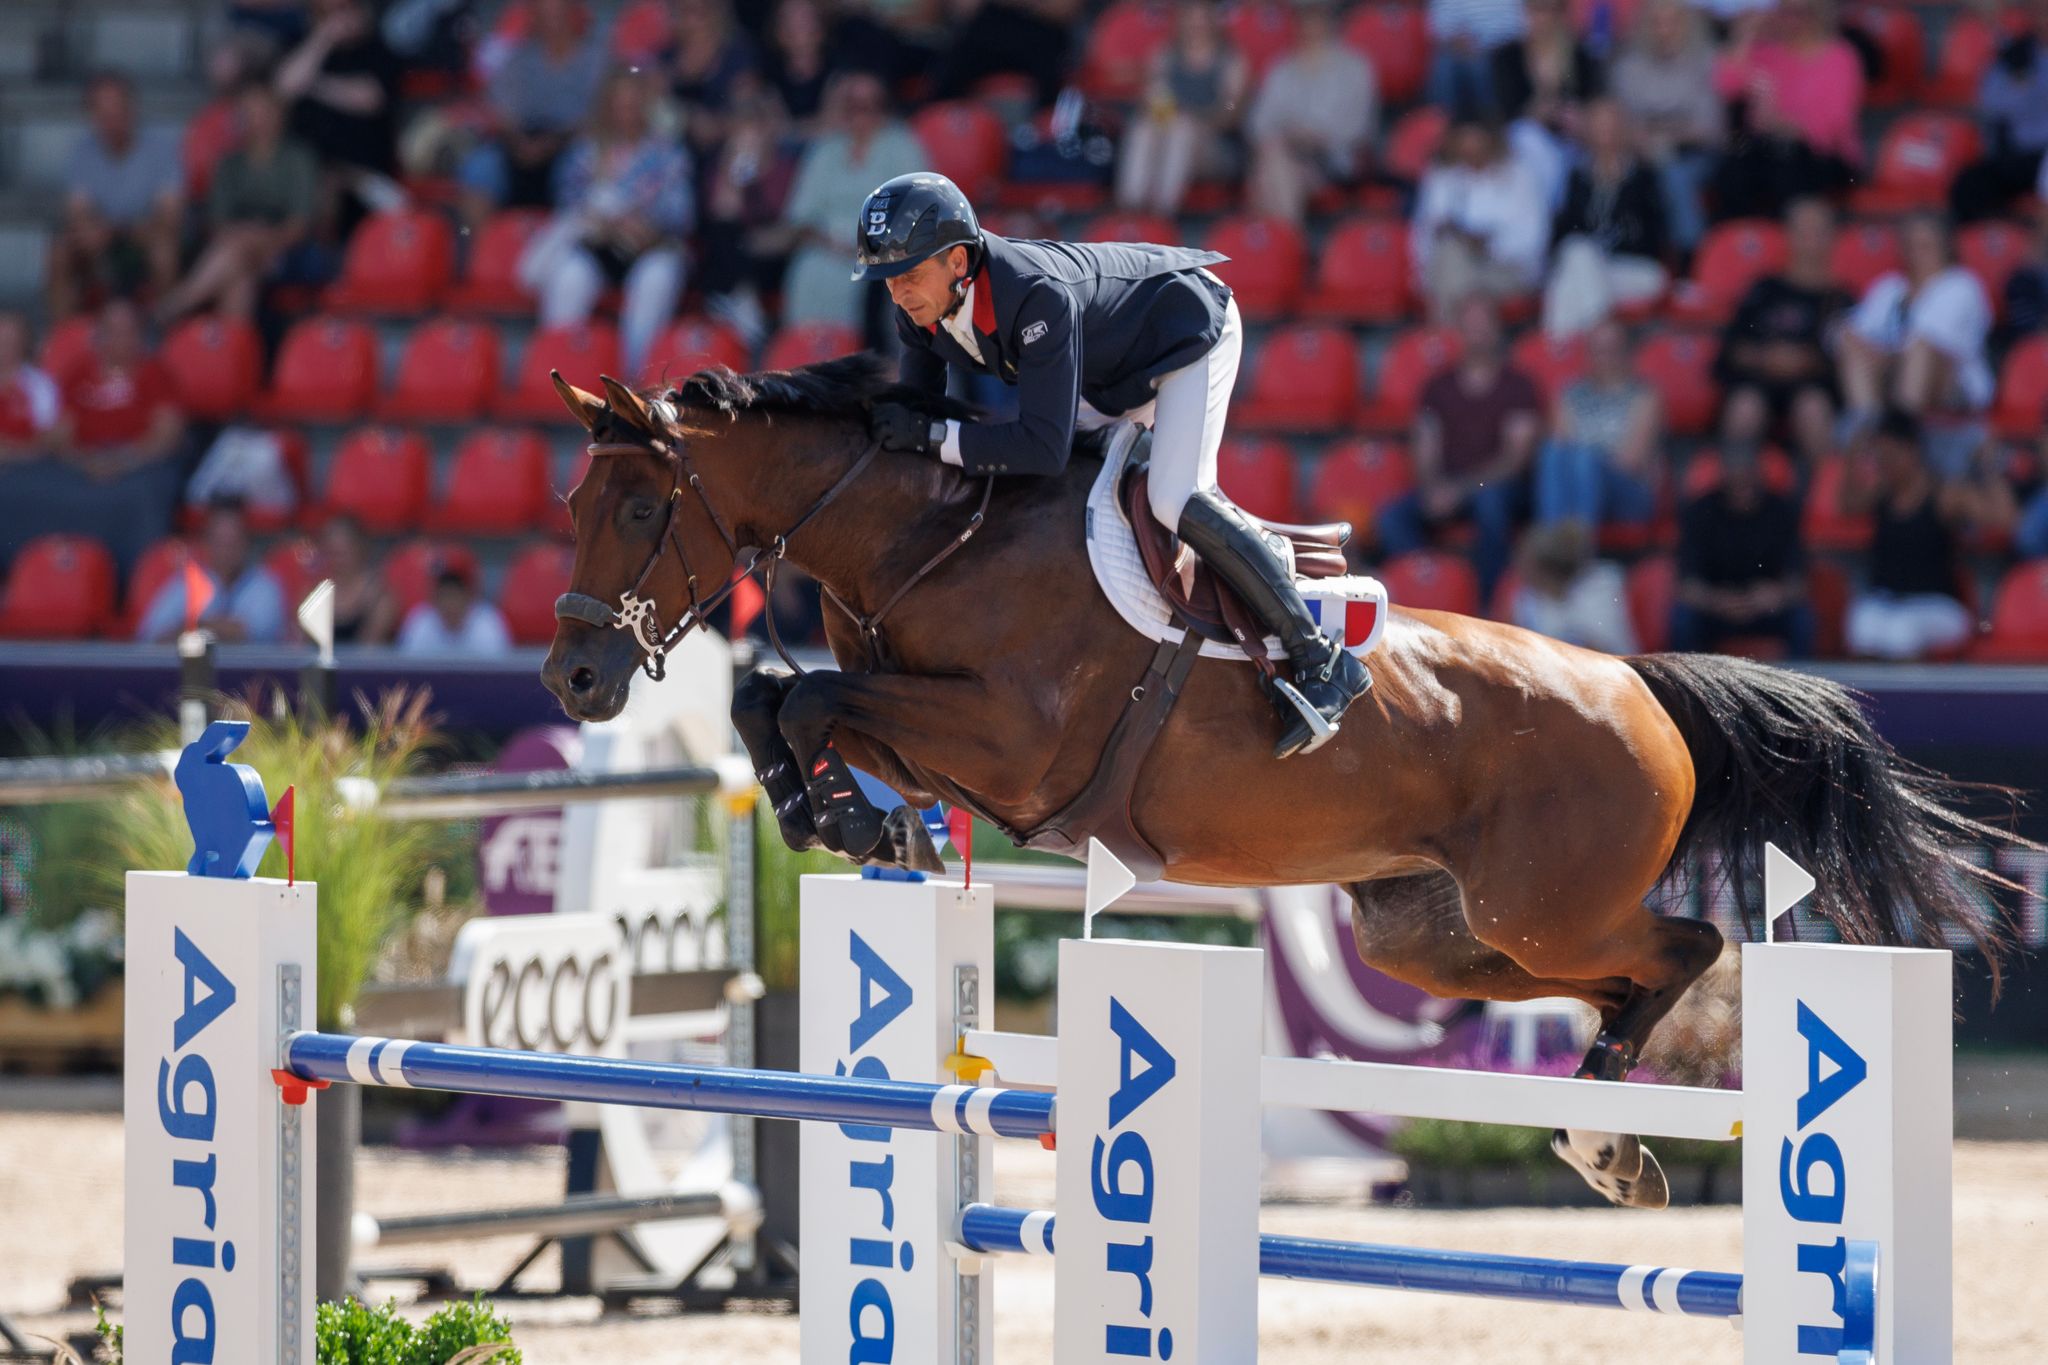 Julien Epaillard and Pedro Veniss start strong with new horses in Rome